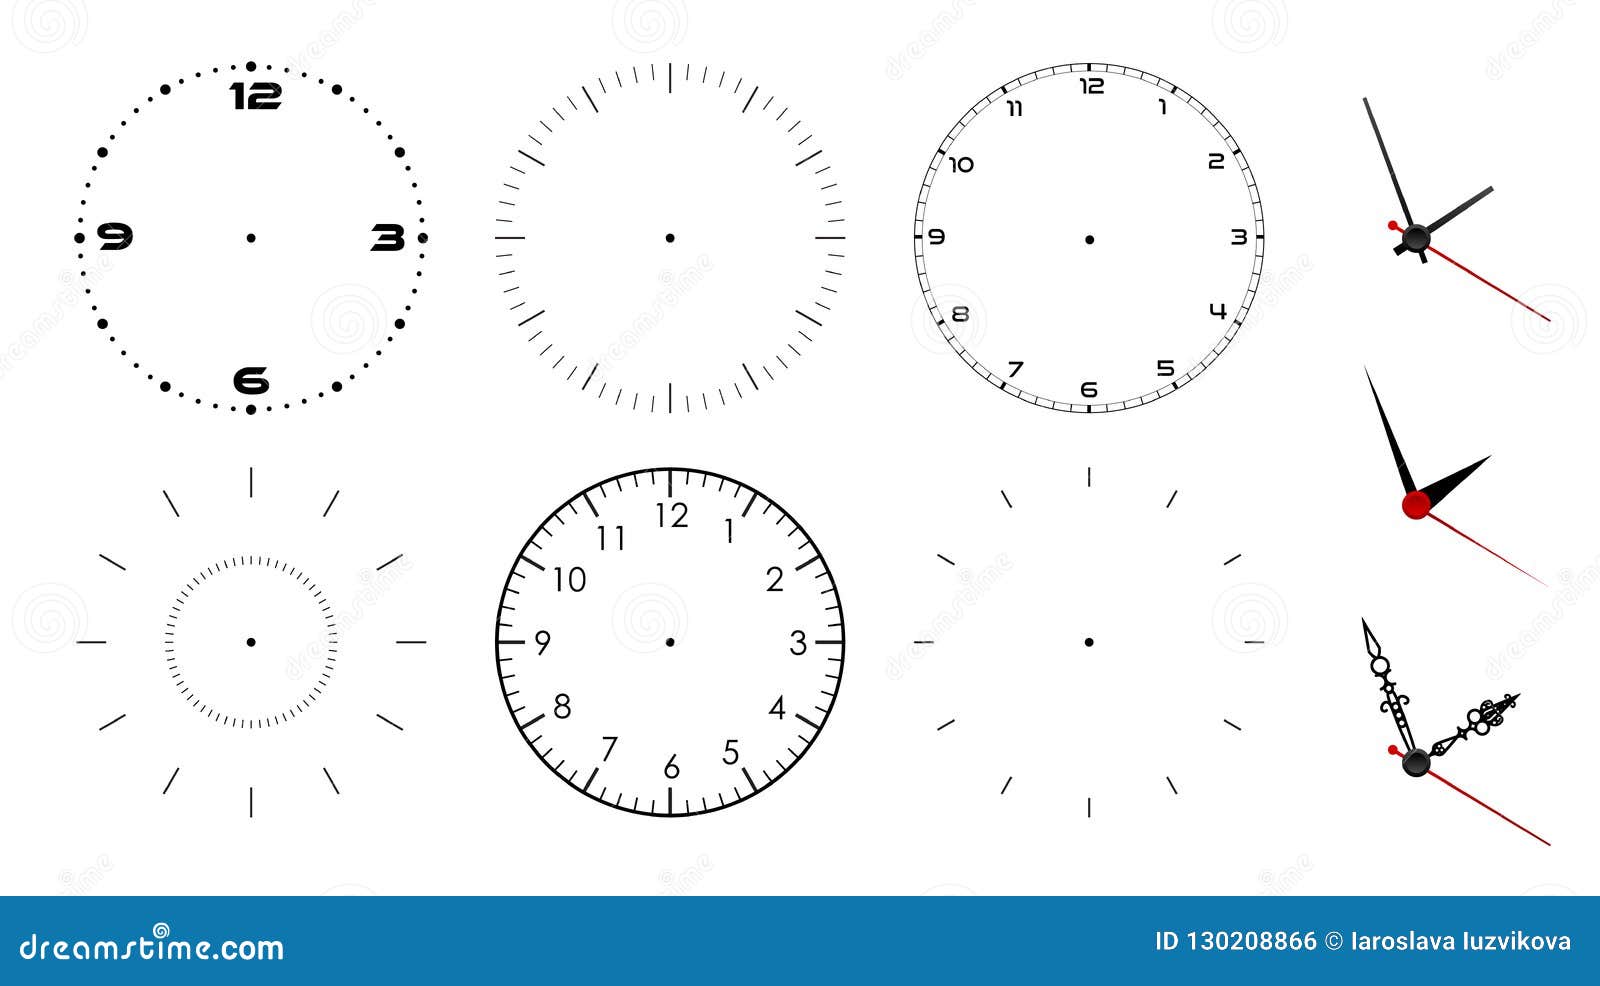 Getting Started with Watch Face Development Using the Tizen Web API   Samsung Developers